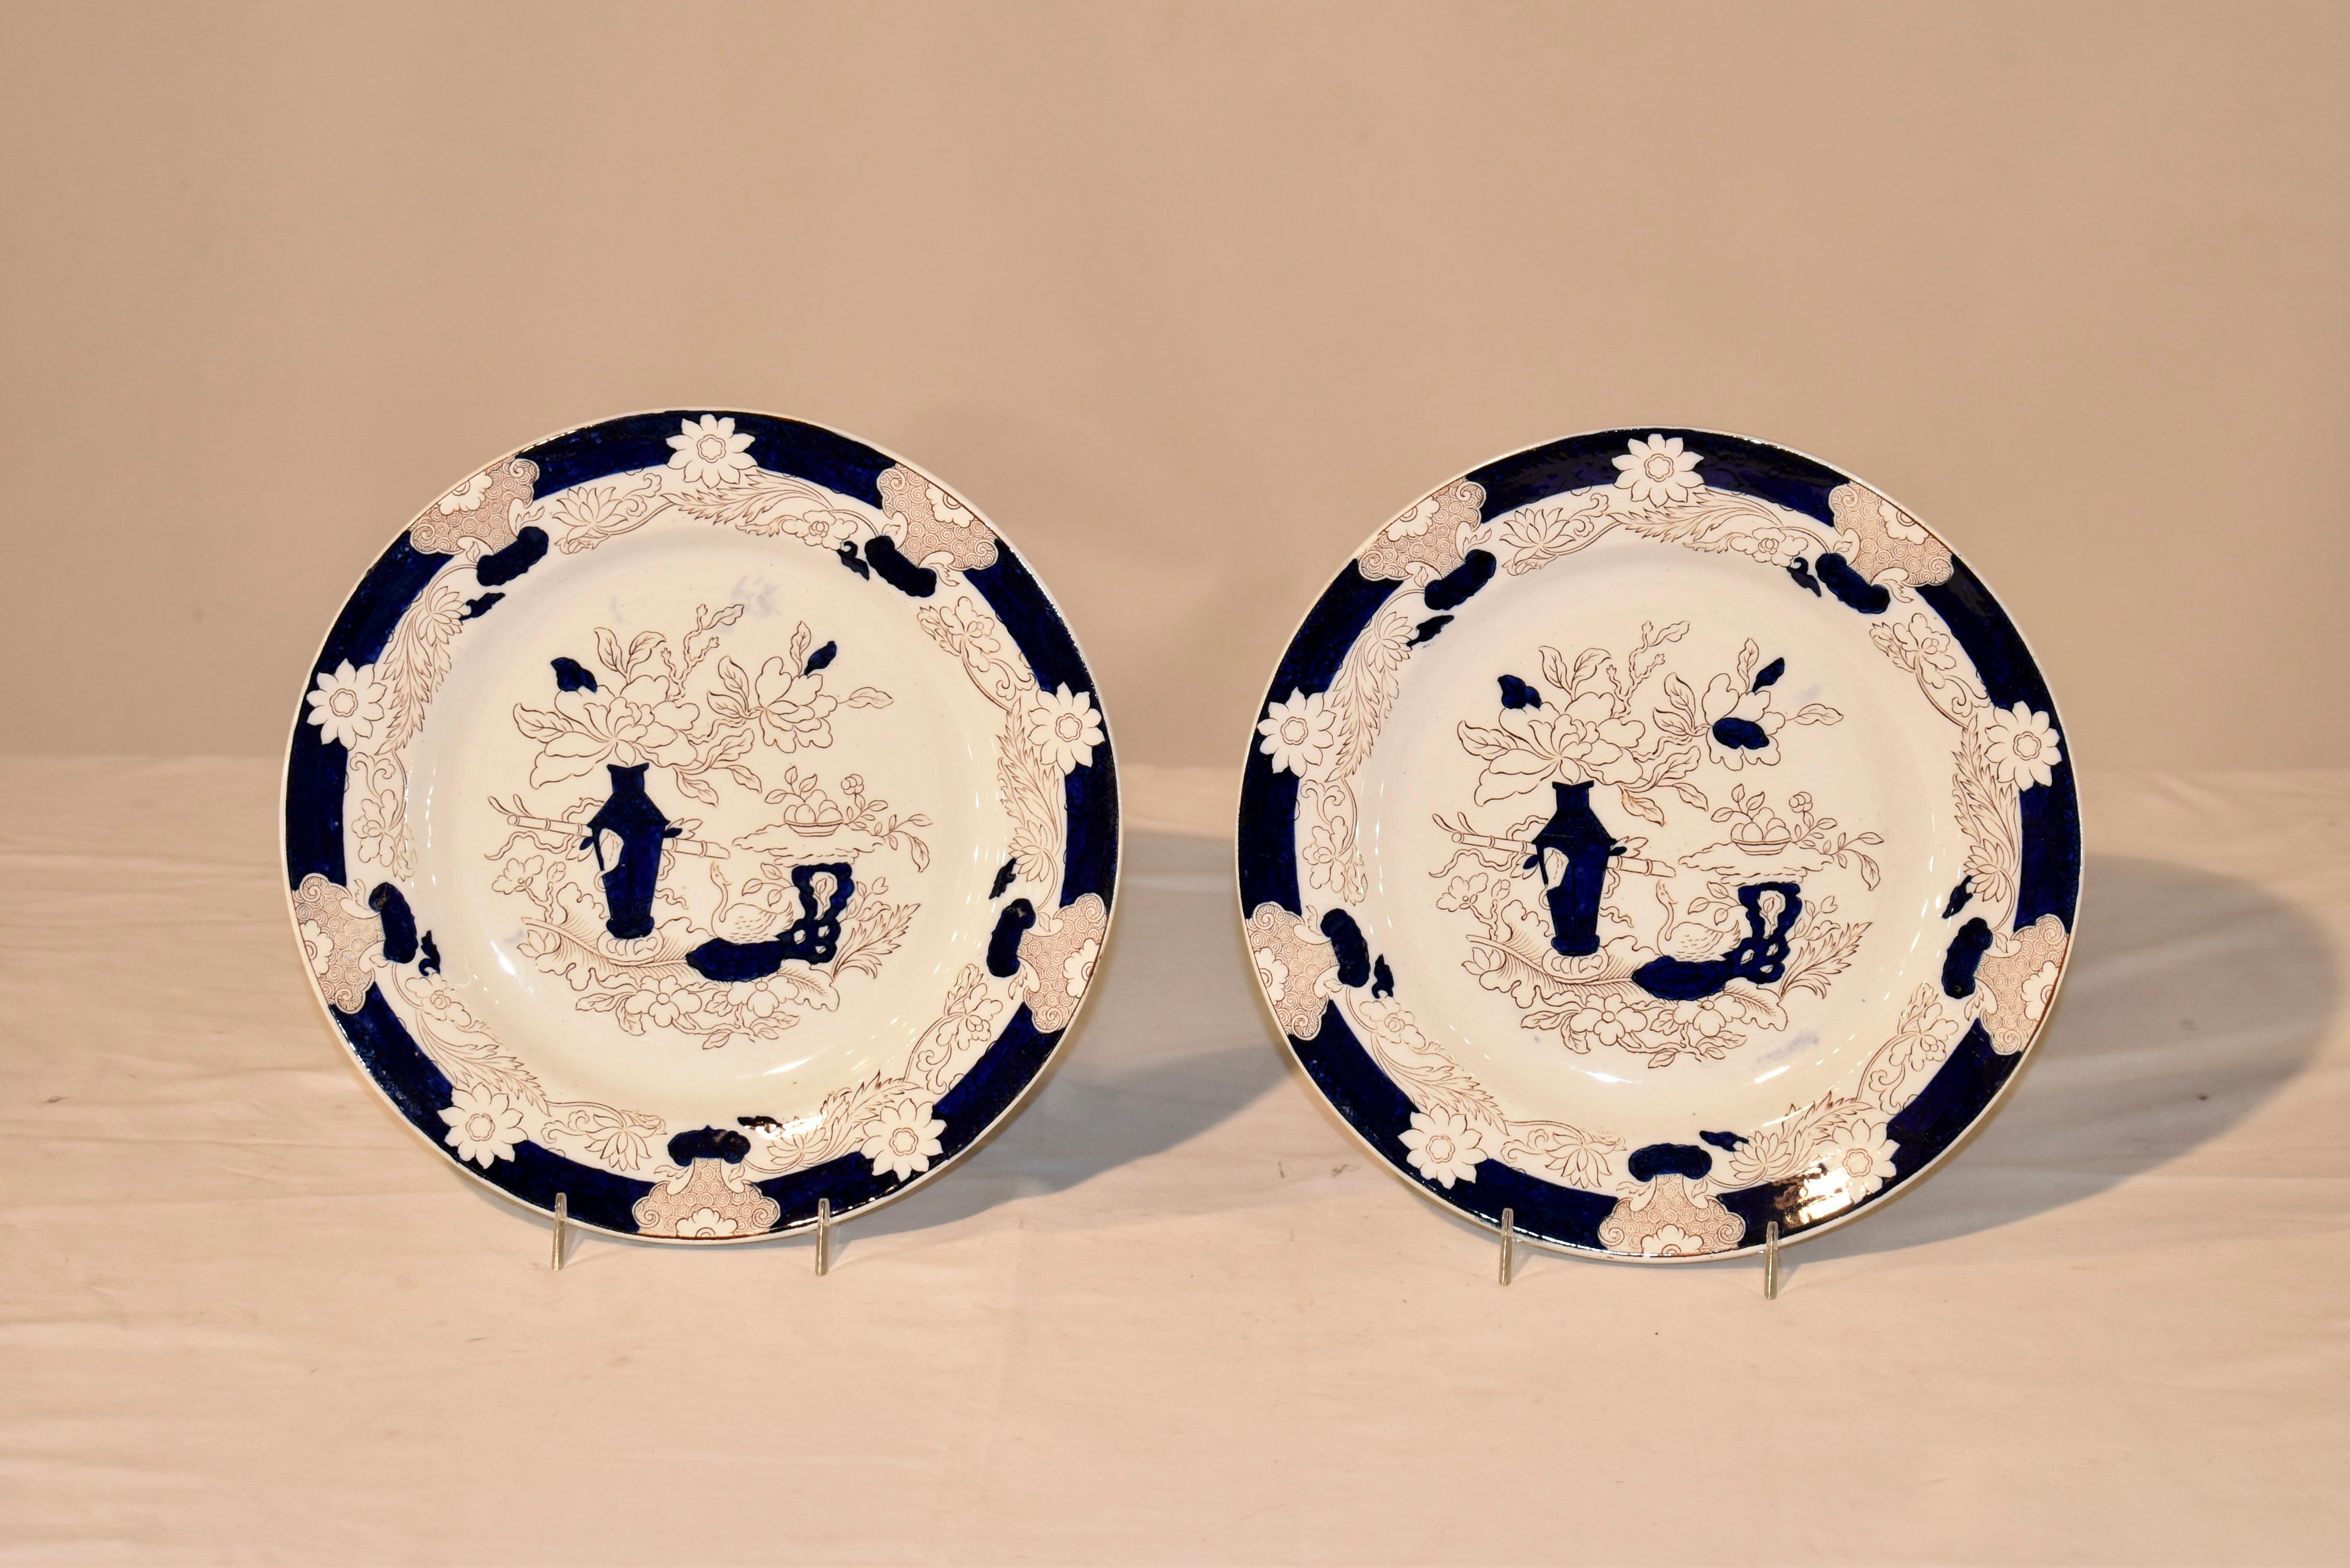 Pair of 19th century transfer plates with flow blue decoration. Marked with an impressed GL Ashworth mark. Ashworth pottery was in Hanley in Staffordshire. The plate is in a sepia colored transfer and the plates are hand colored in flow blue dark